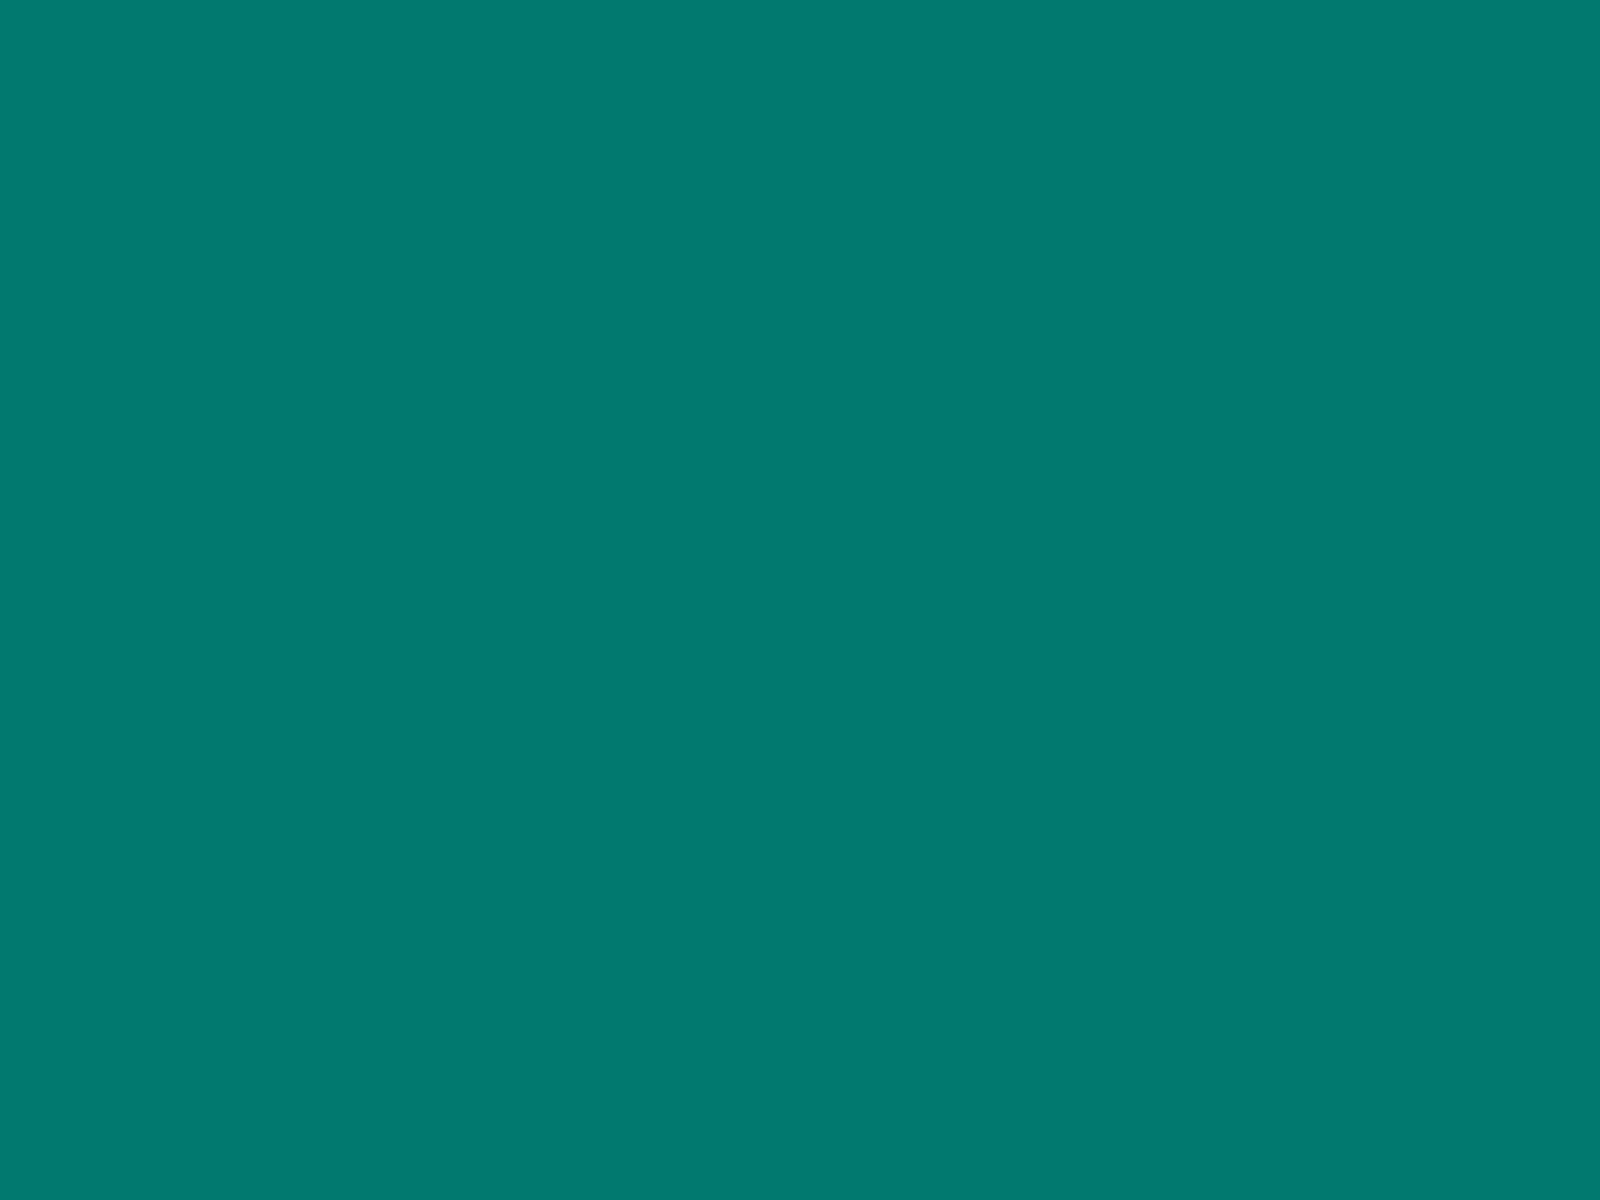 1600x1200 Pine Green Solid Color Background